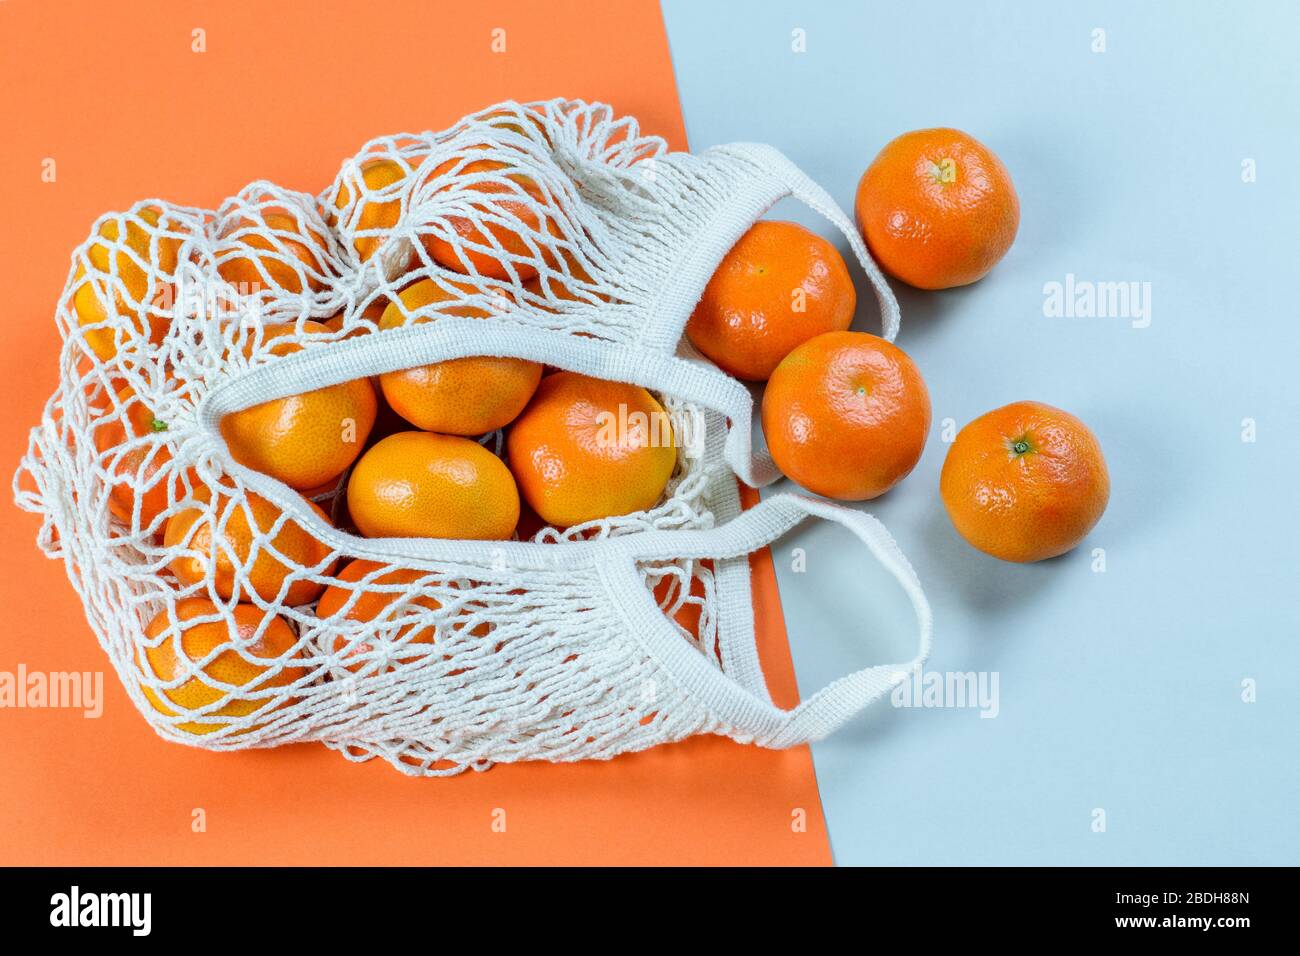 https://c8.alamy.com/comp/2BDH88N/group-of-fresh-tangerines-in-the-string-cotton-bag-isolated-flat-lay-top-view-free-plastic-eco-friendly-zero-waste-concept-2BDH88N.jpg